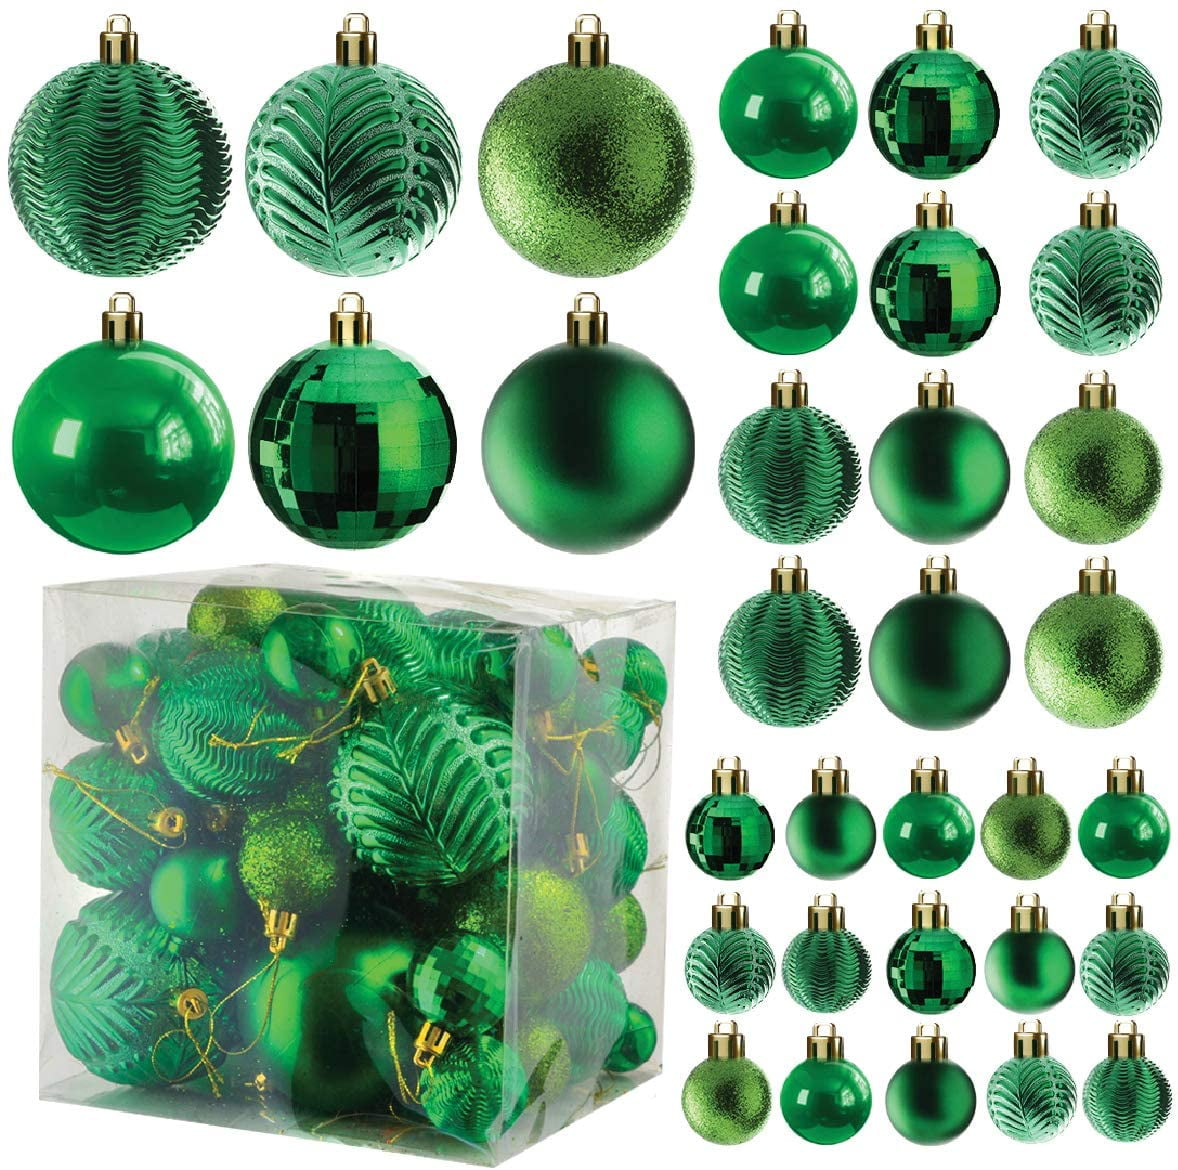 Details about   Christmas Party Decoration Ornaments Xmas Gift Hanging Balls Home Decoration 